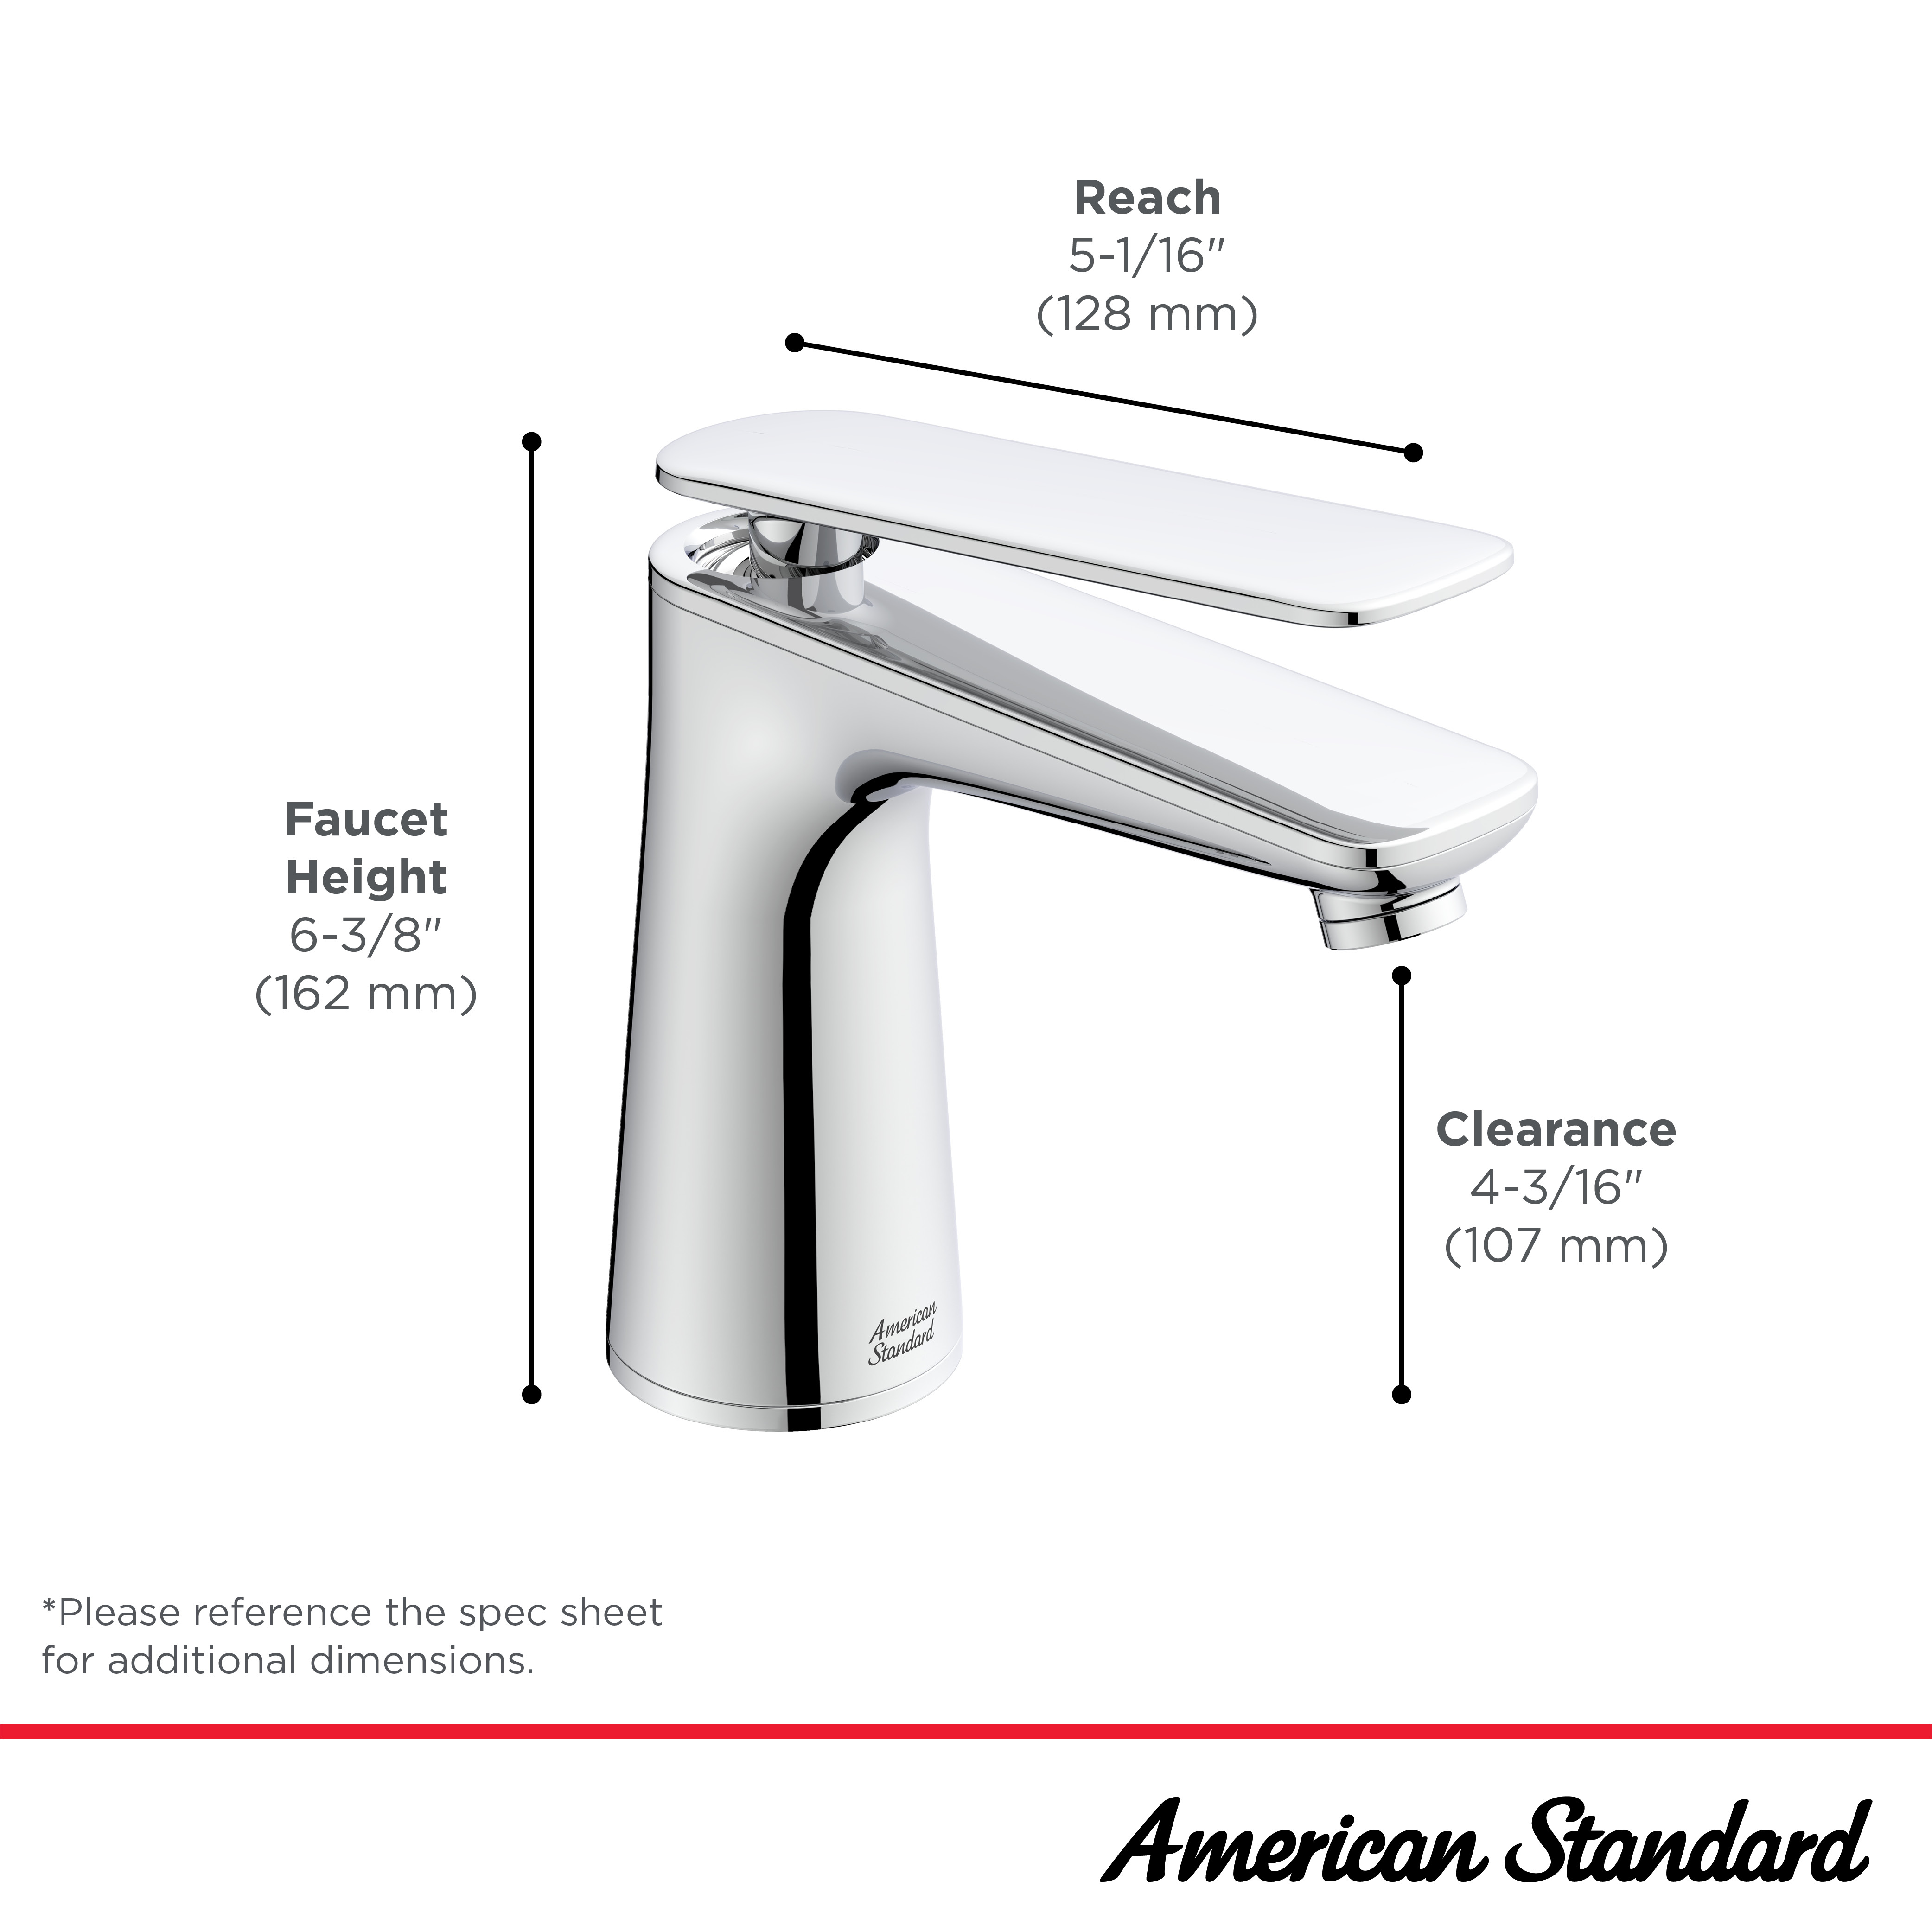 Aspirations® Single-Handle Bathroom Faucet 1.2 gpm/ 4.5 L/min With Lever Handle